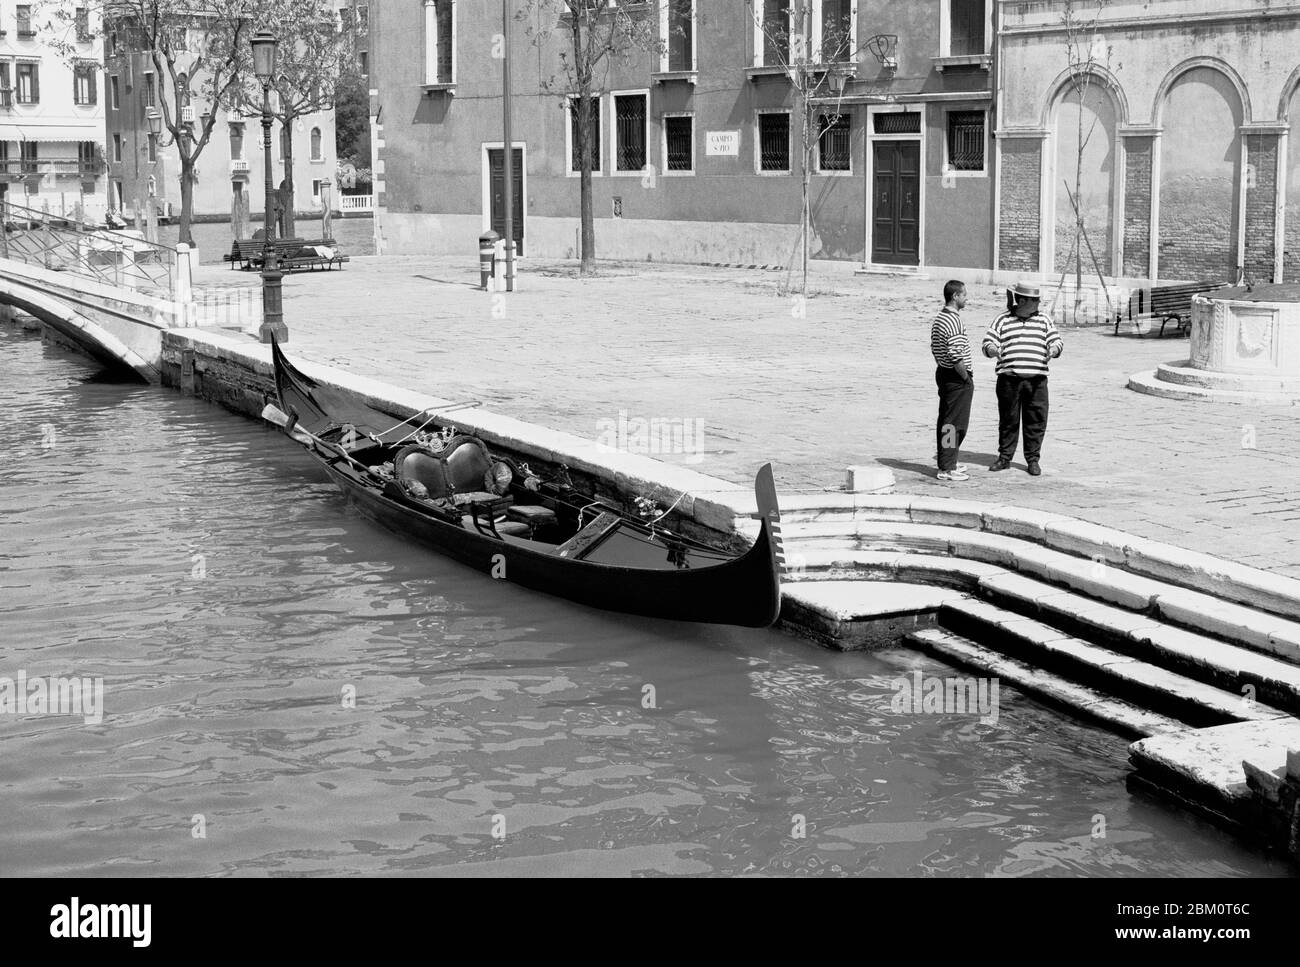 GONDOLIERI AND HIS GONDOLA EXPECTING PASSENGERS ON ONE OF THE CANALS OF THE CITY - VENICE ITALY - VENEZIA ITALIA - VENICE CLASSIC - SILVER PHOTOGRAPHY © Frédéric BEAUMONT Stock Photo